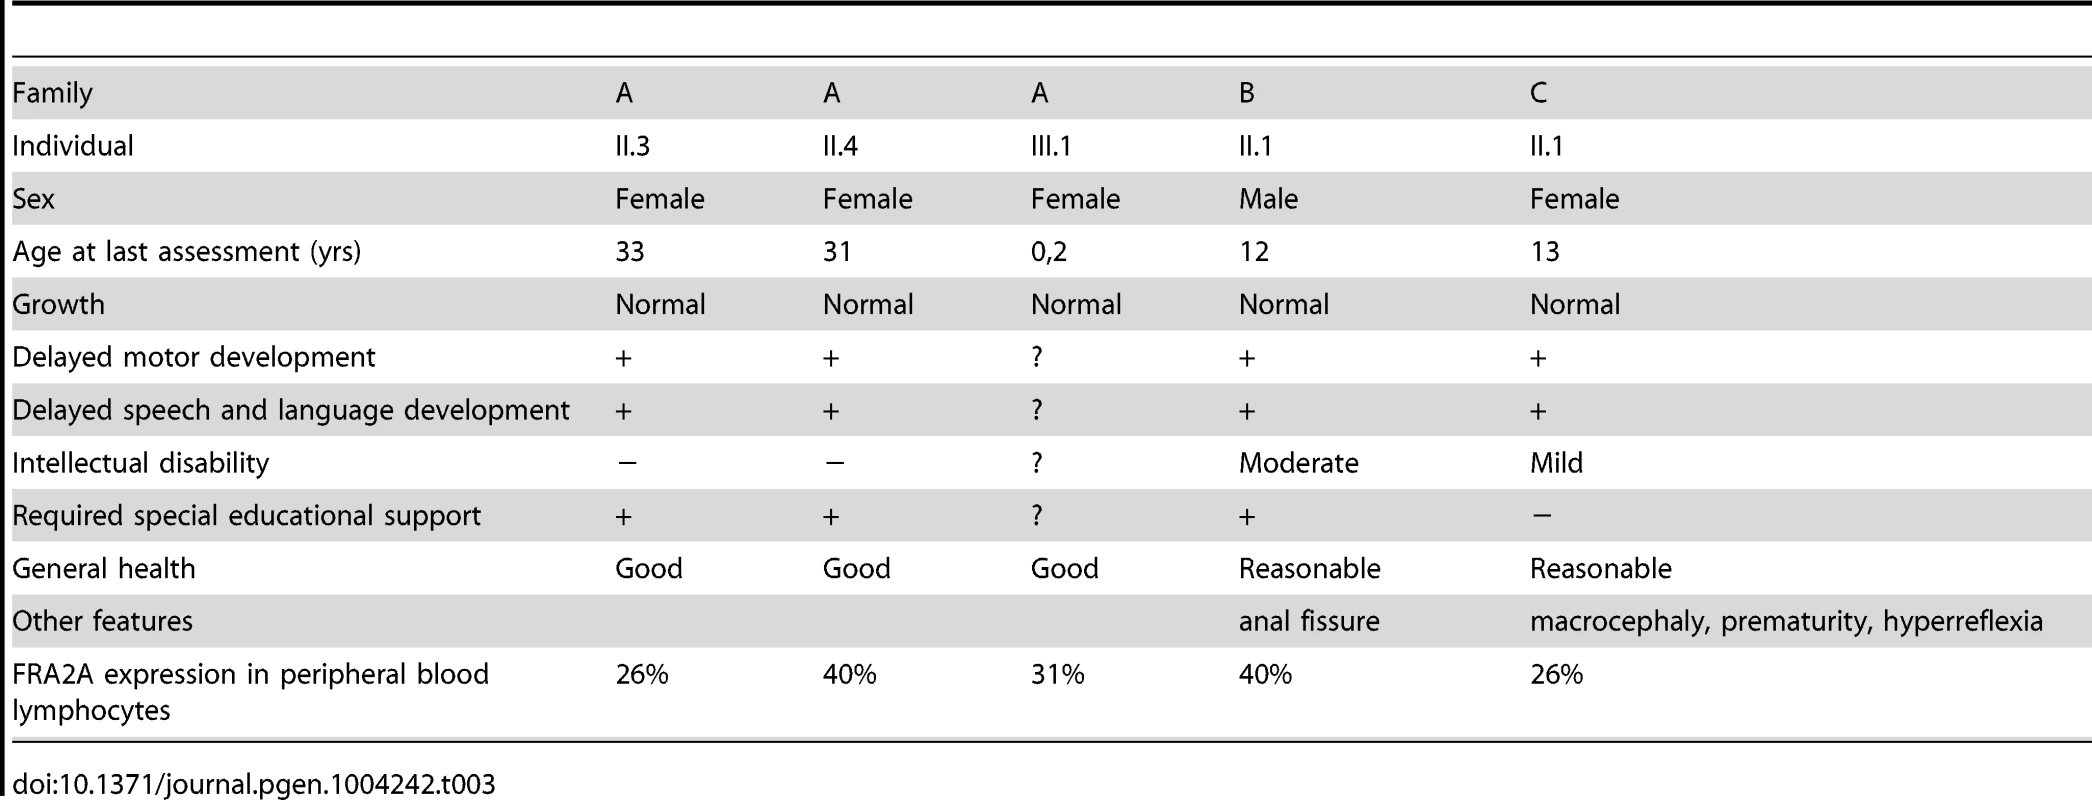 Clinical findings in FRA2A carriers.